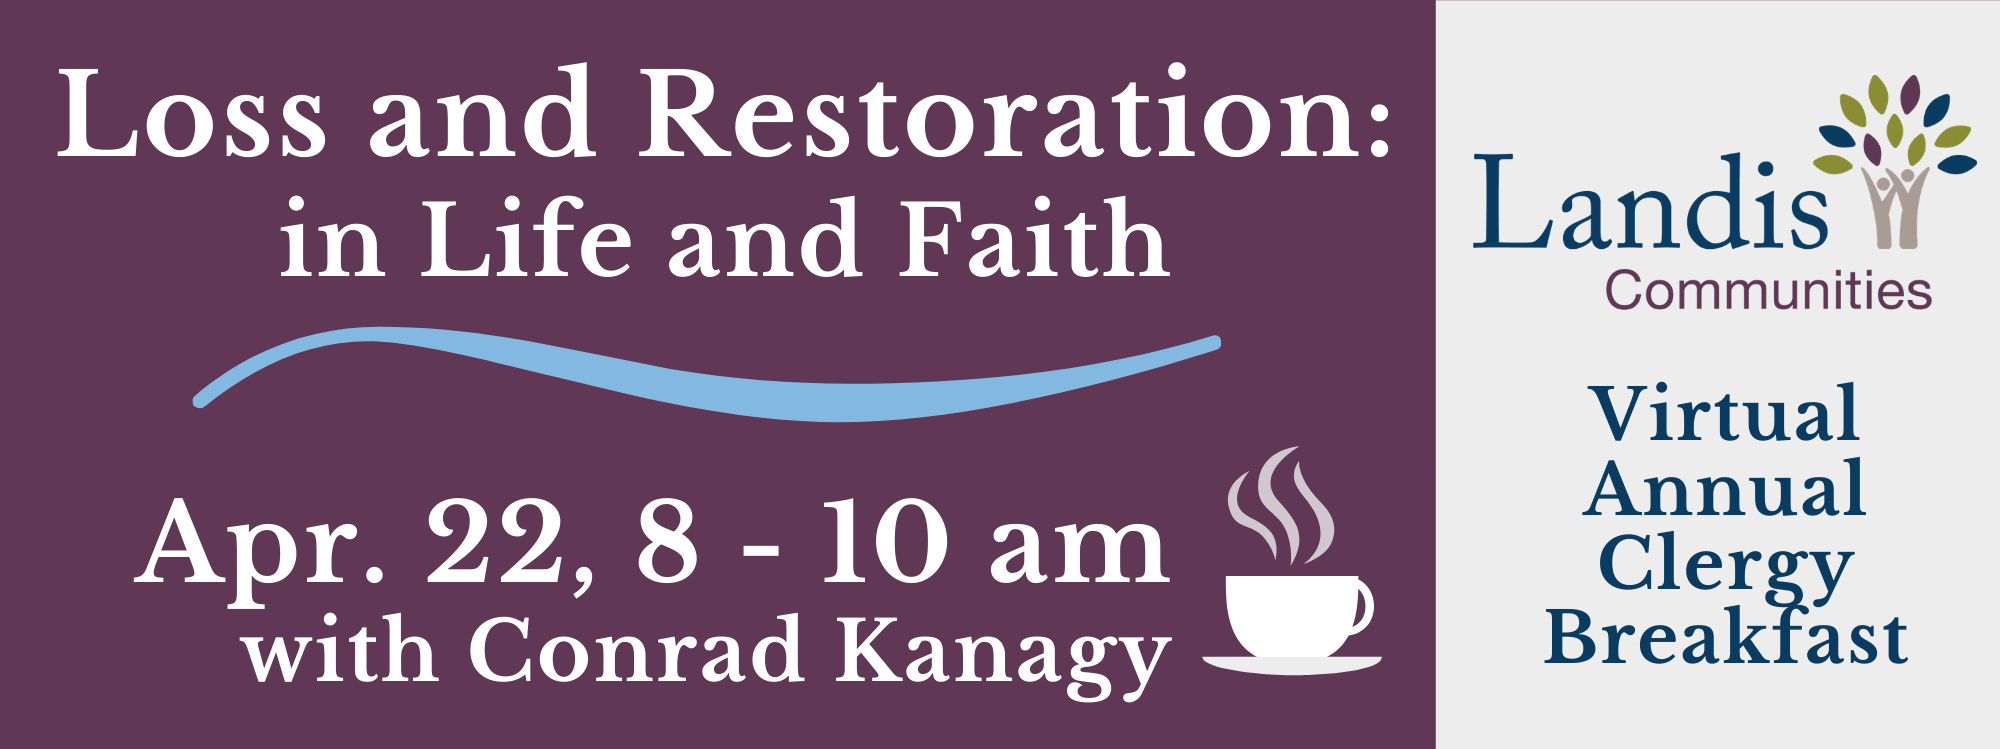 Loss and Restoration: in Life and Faith